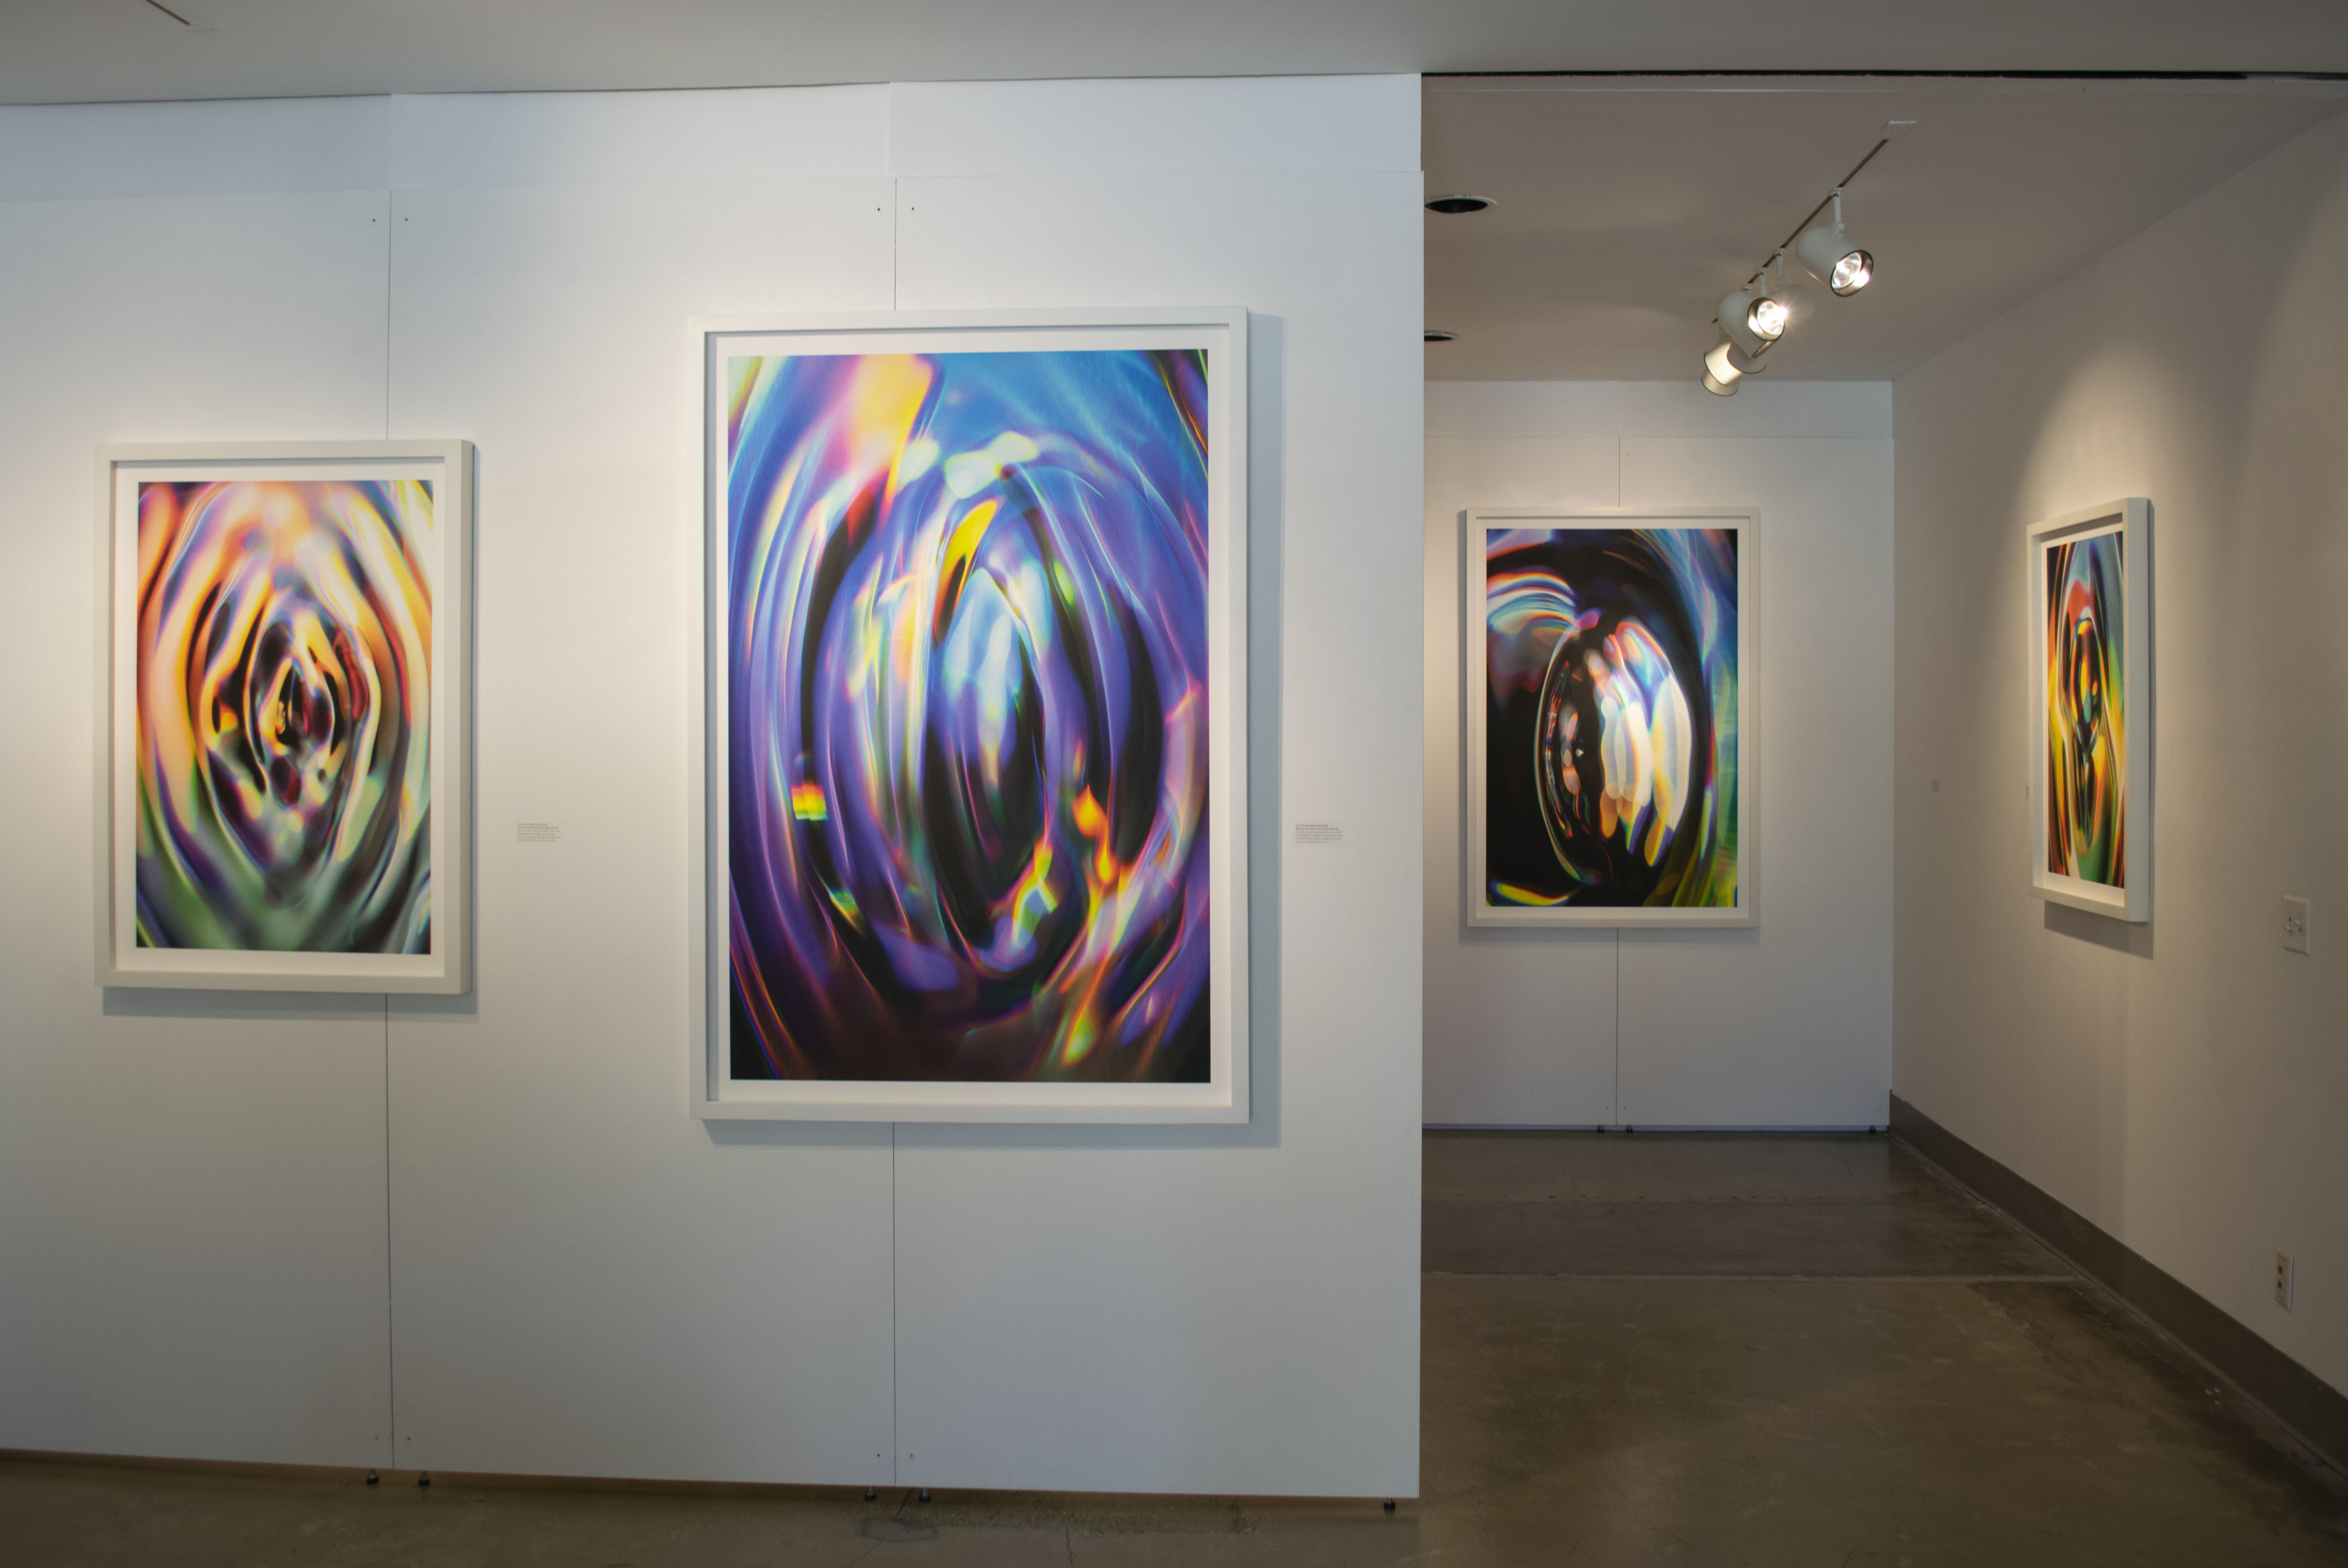 Passageway in the gallery, Exhibition: Sasha vom Dorp: 15.15 Hz, Aug. 23 - Oct. 18, 2018, Curator: Michele Cairella Fillmore, W. Keith & Janet Kellogg Art Gallery, Cal Poly Pomona. [New Mexico-based artist Sasha vom Dorp interplay of light, sound and water in microscopic moments (Photo Credit: William W. Gunn)]